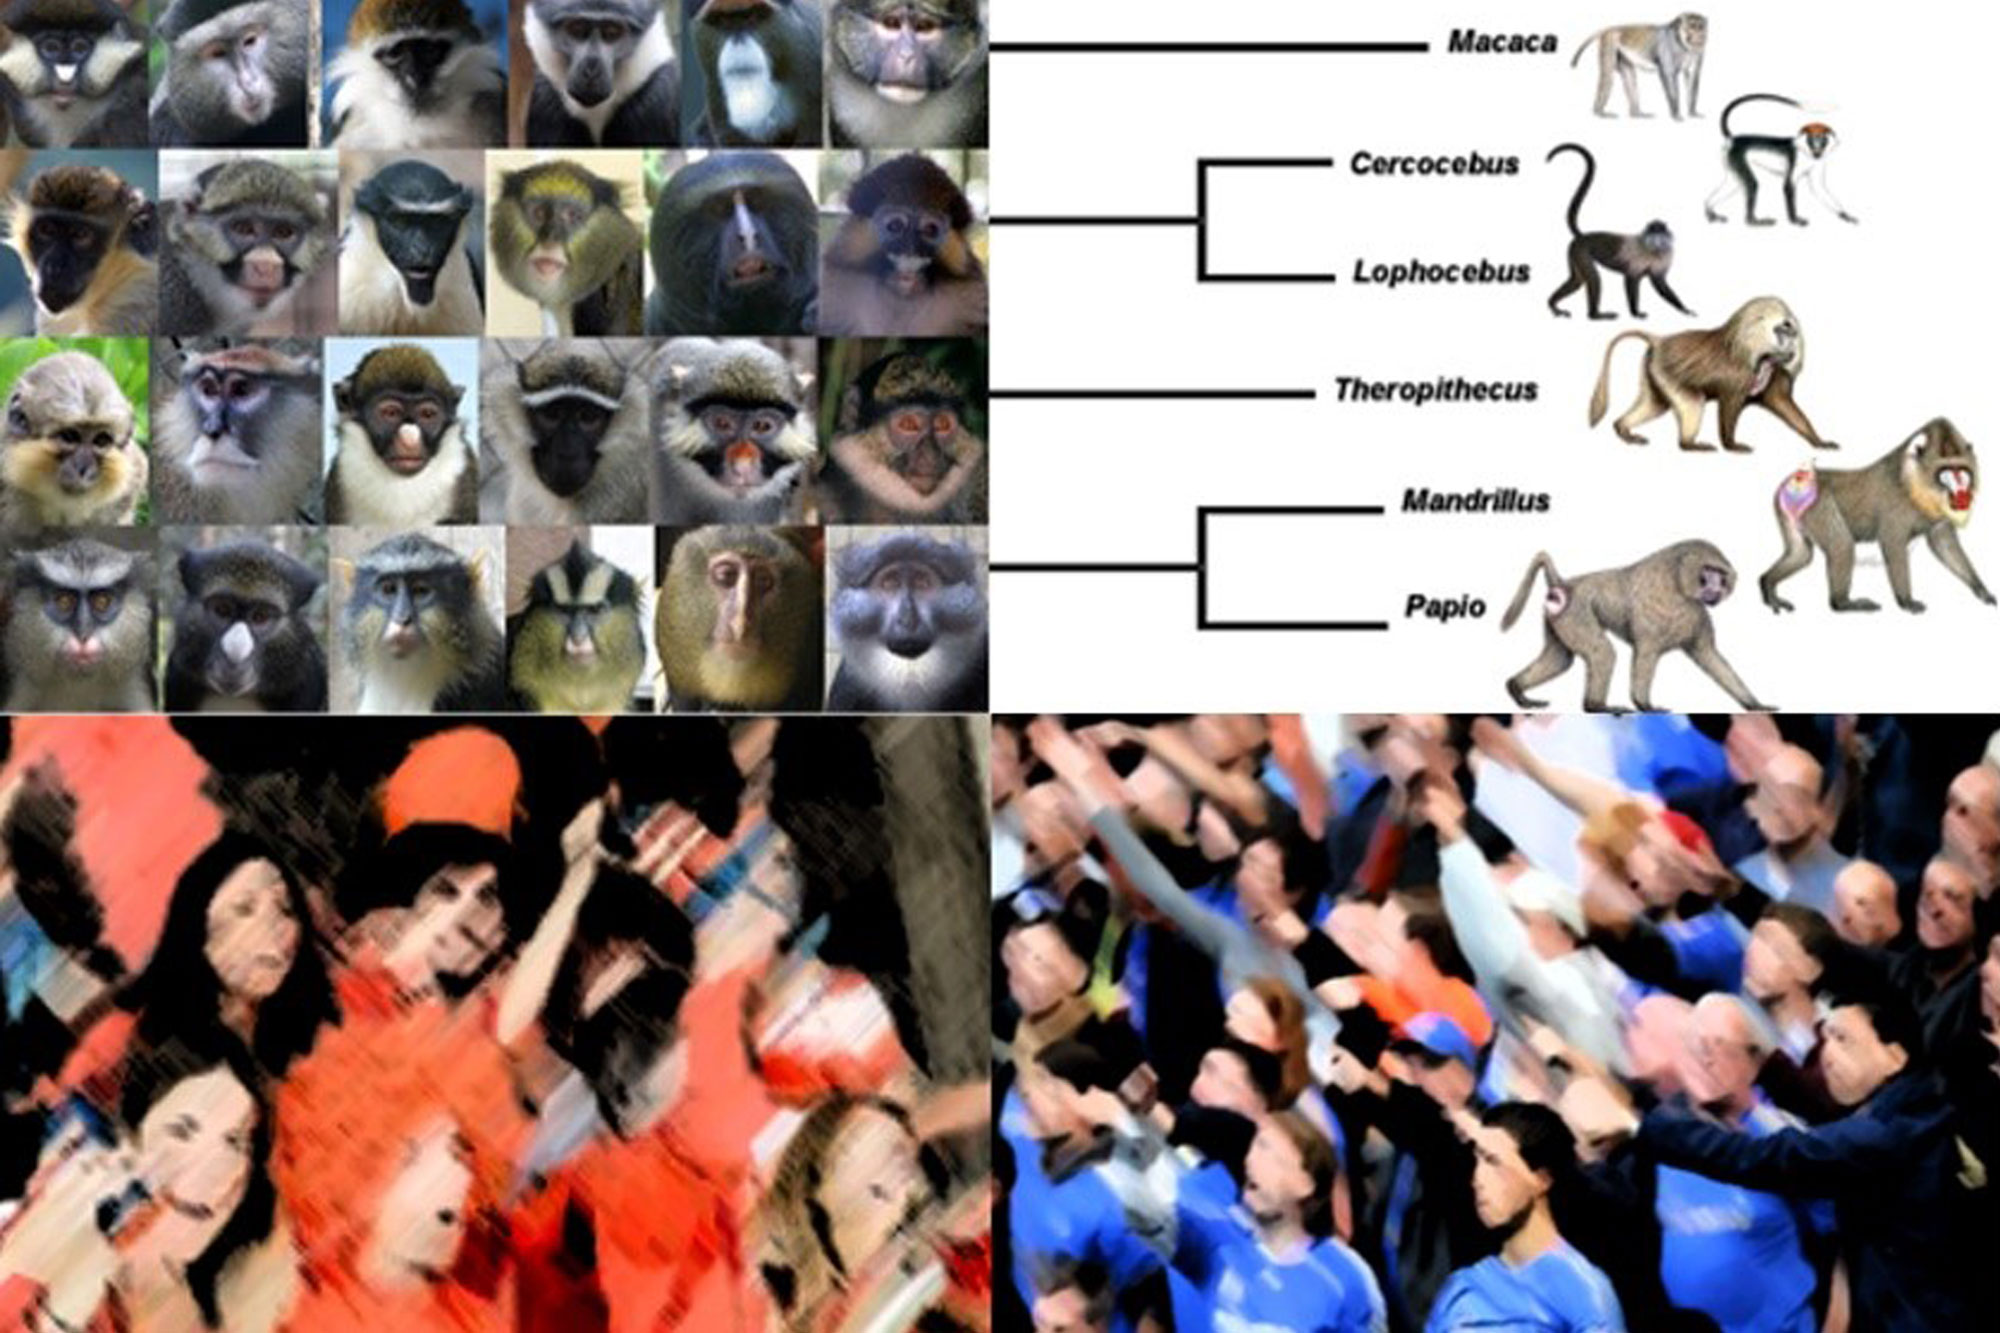 Four images of different species of primate (Professor Elton's talk) and images of football supporters (Dr Newson's talk)